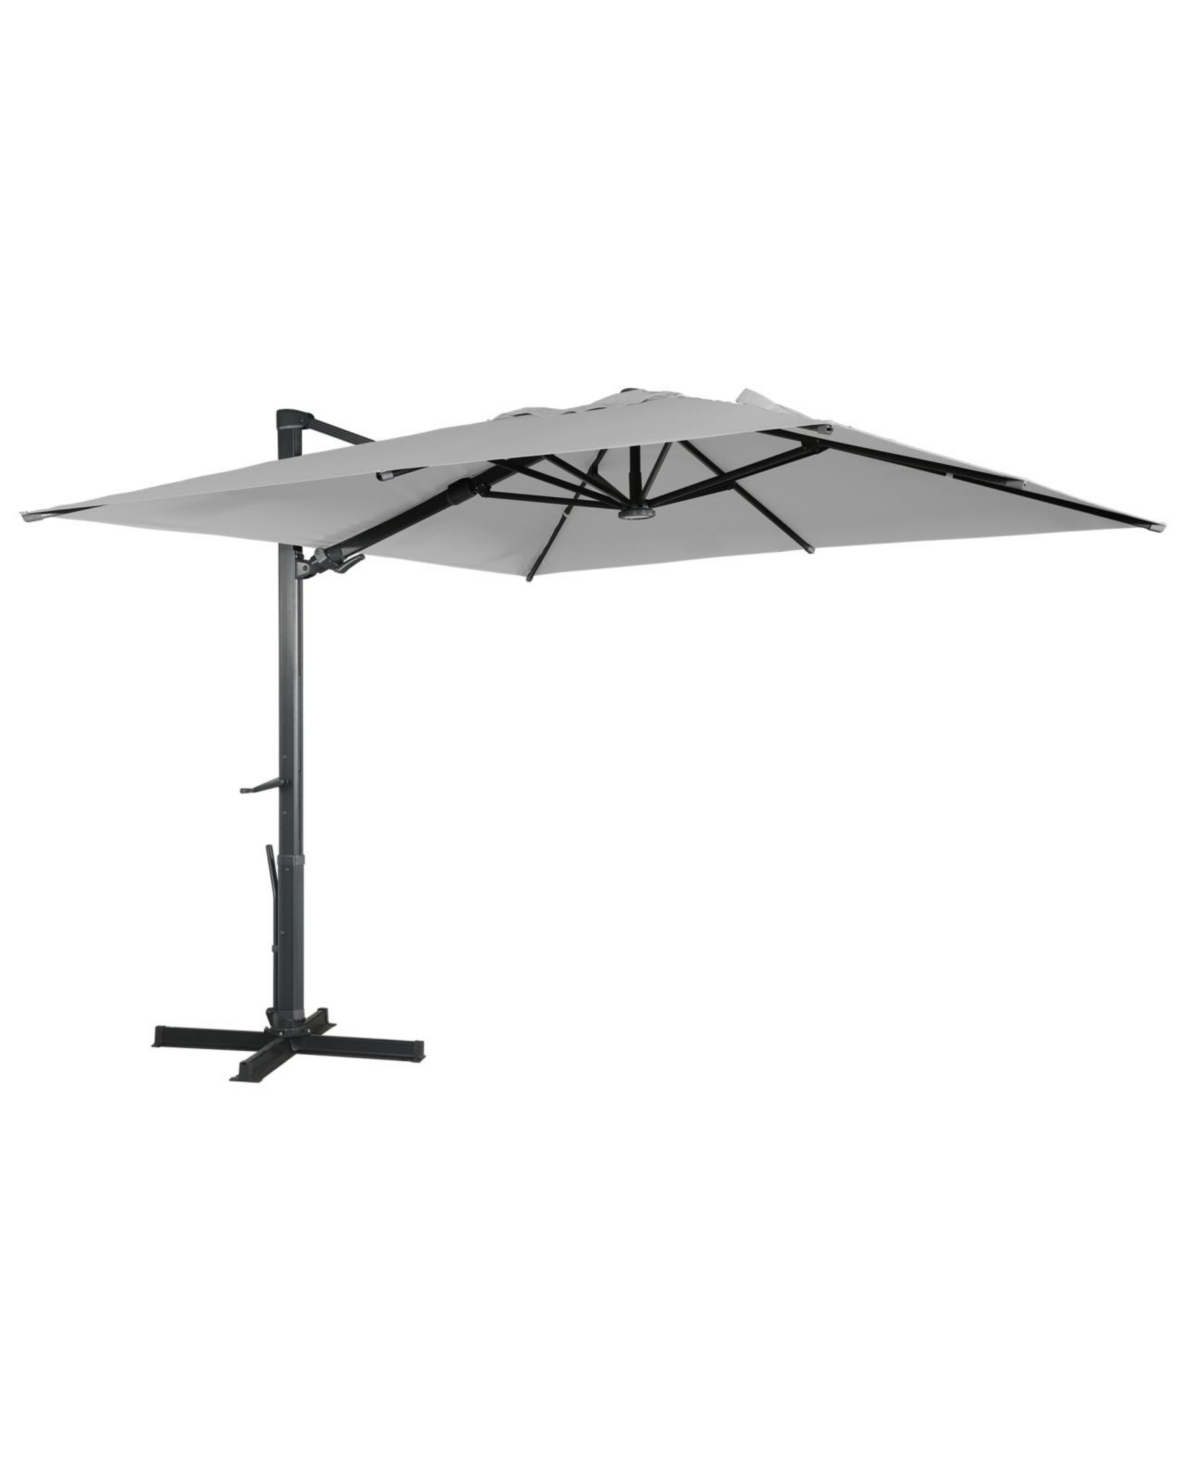 10ft Square Solar Led Cantilever Patio Umbrella for Outdoor Shade - Gray